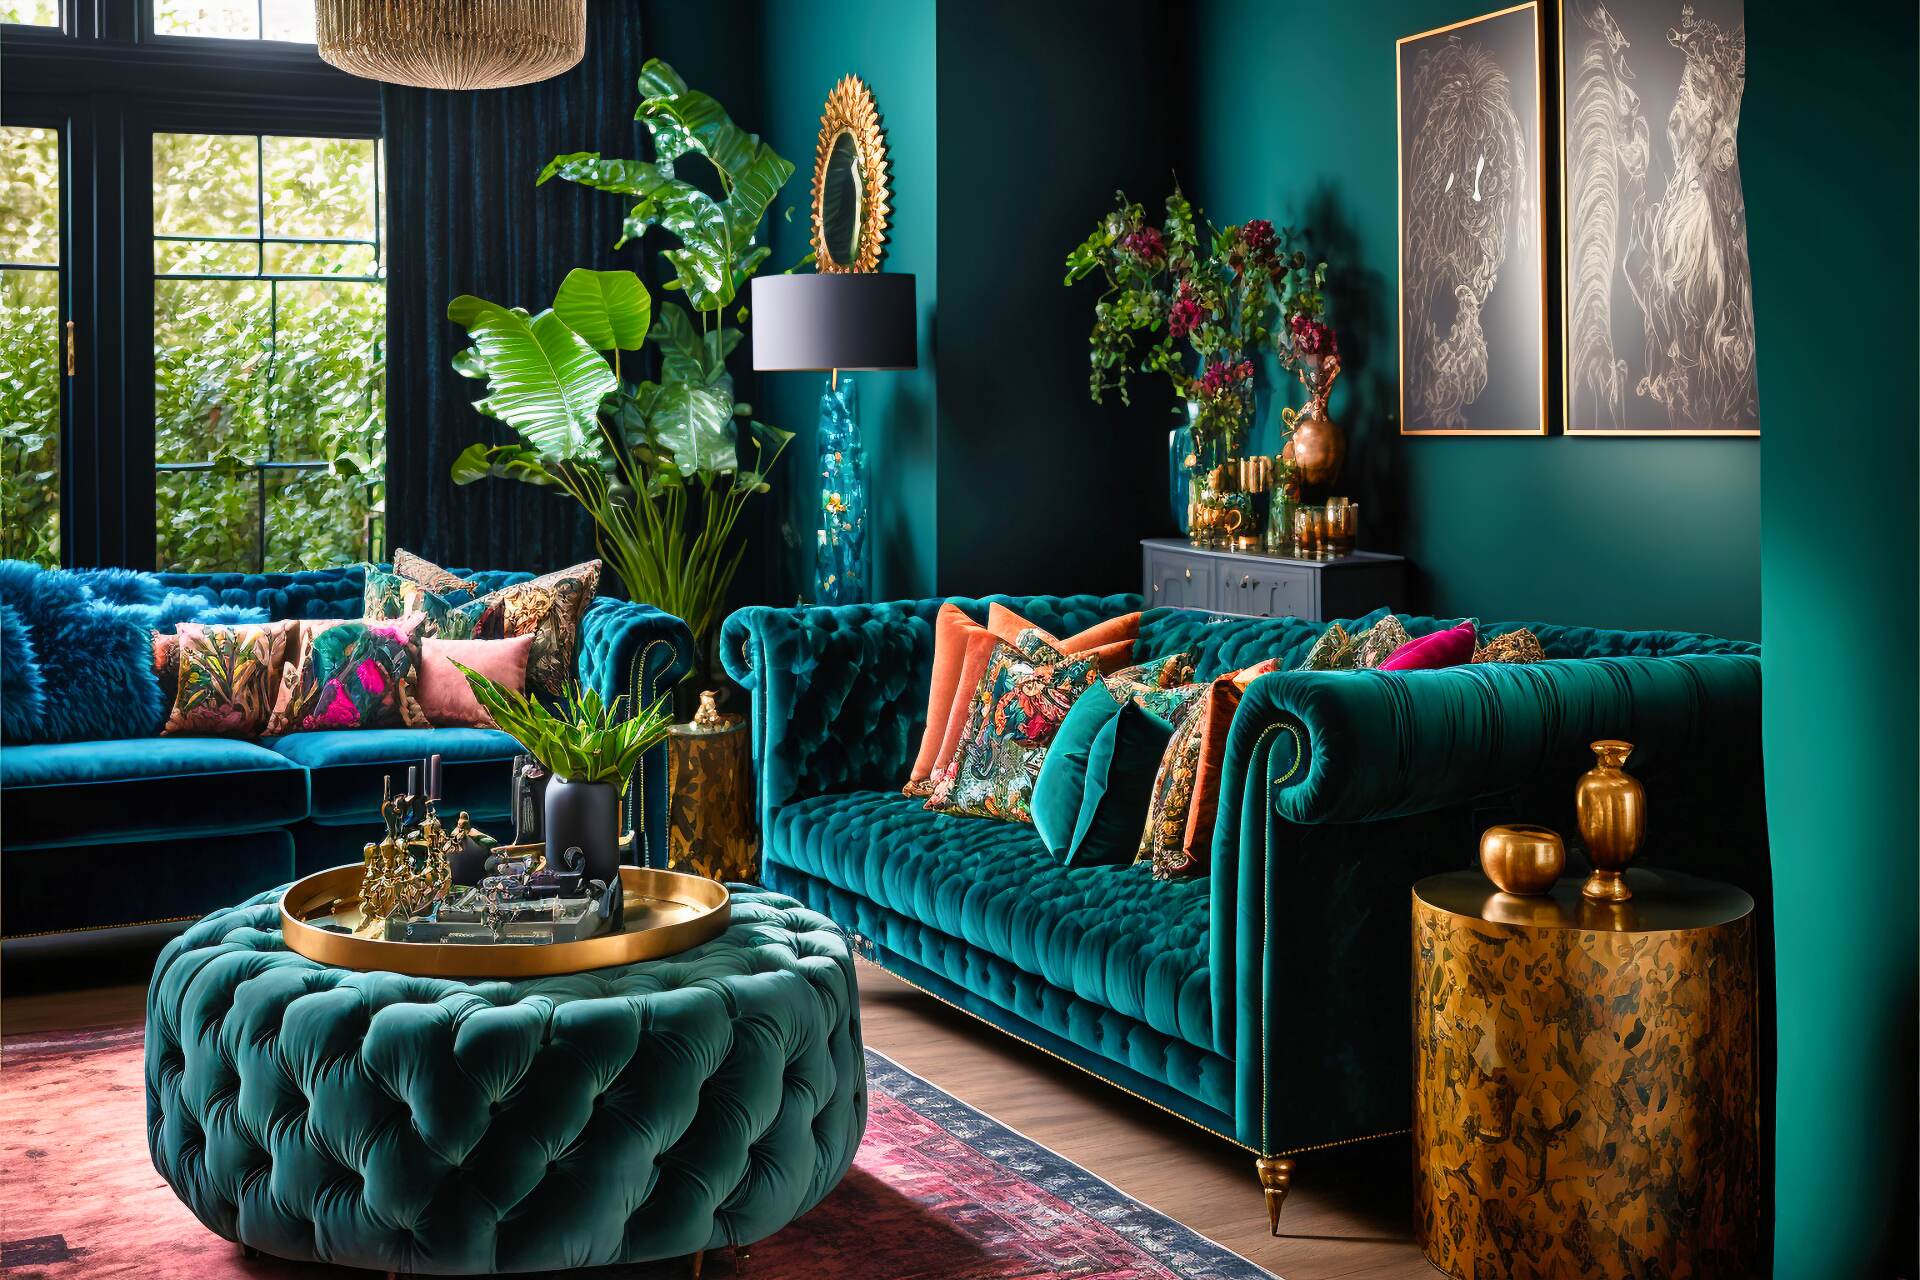 A Grandiose Maximalist Style Living Room - Leisurely Entertain Guests With This Vibrant And Inviting Maximalist Style Living Room. Deep Teal Walls Make A Backdrop For The Sophisticated Mix Of Textures And Colors, Including A Velvety Brown Velvet Sofa, Emerald Green Armchair, Oil-Wheel Patterned Ottomans, And A Dazzling Crystal Chandelier Hanging Above. On The Right Side Of The Room Stands A Large, Black Television That Glows Against The Walls. A Glossy White Round Coffee Table Keeps The Space Unified And Completes The Look Of Grandiose Charm.